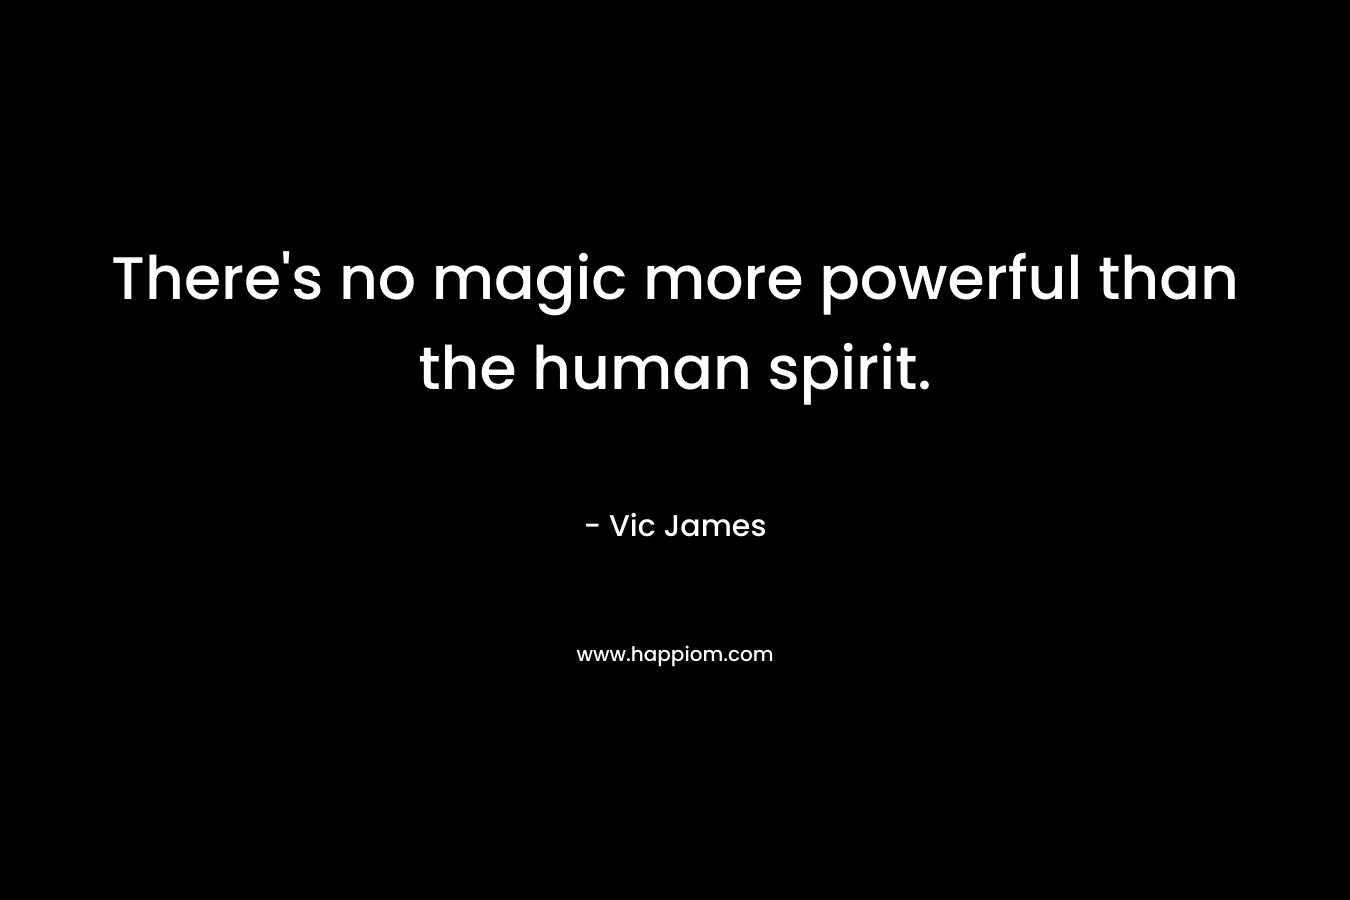 There’s no magic more powerful than the human spirit. – Vic James